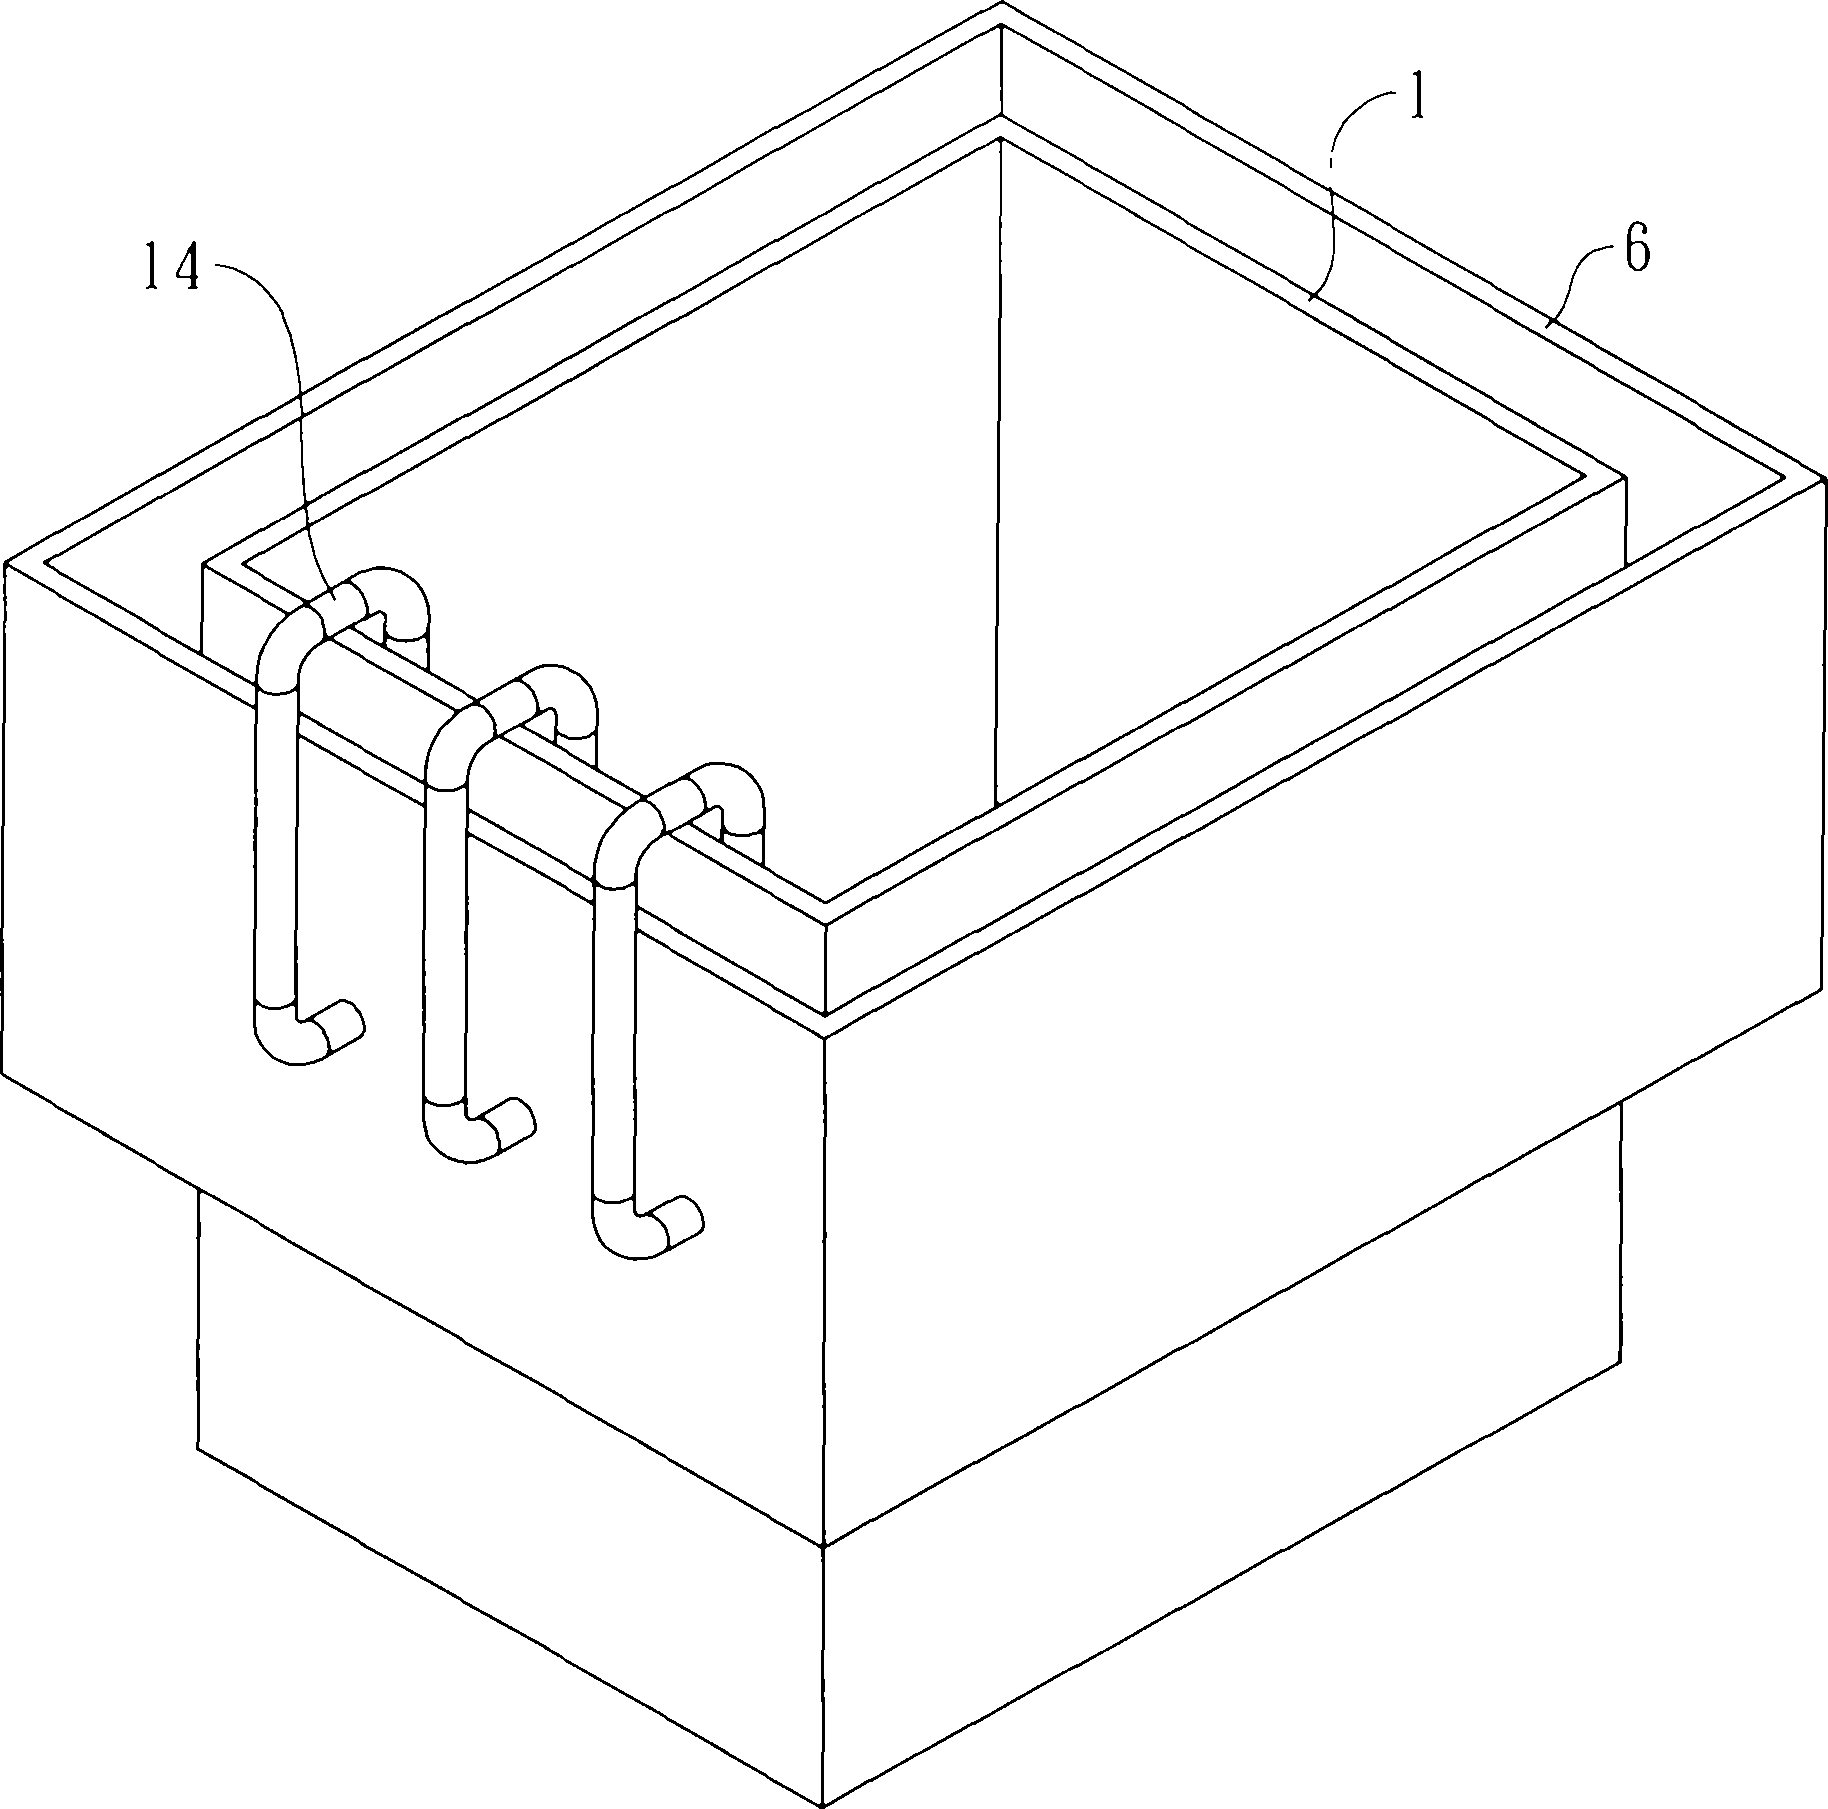 Electroless plating equipment and method